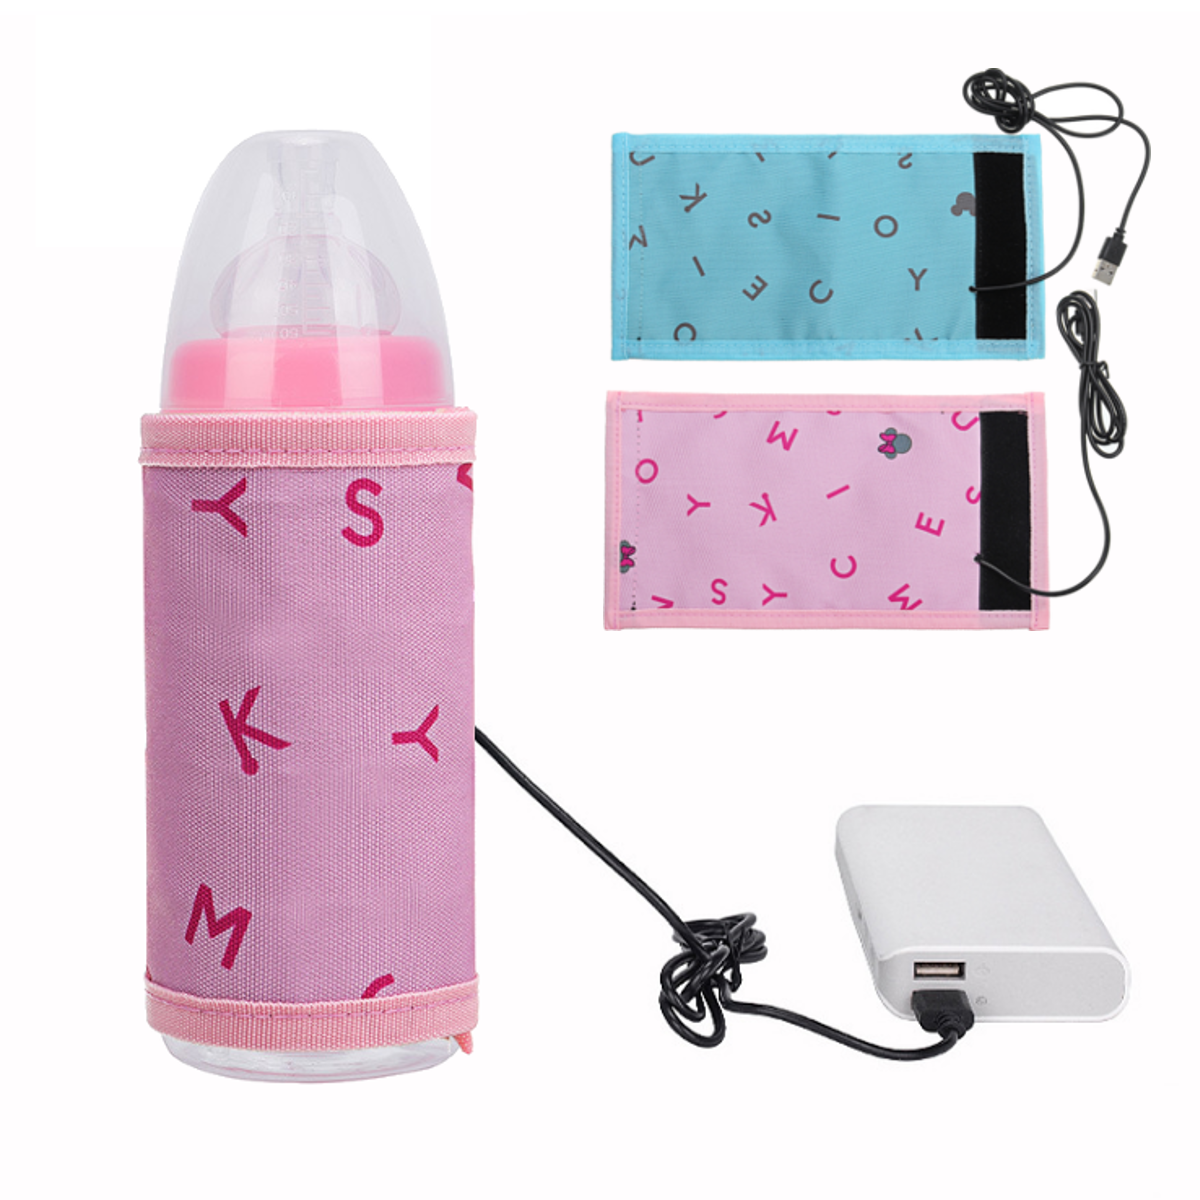 Portable USB Insulating Milk Bottle Carrier Warmer Heater Cover Constant Heating Pad Car Travel